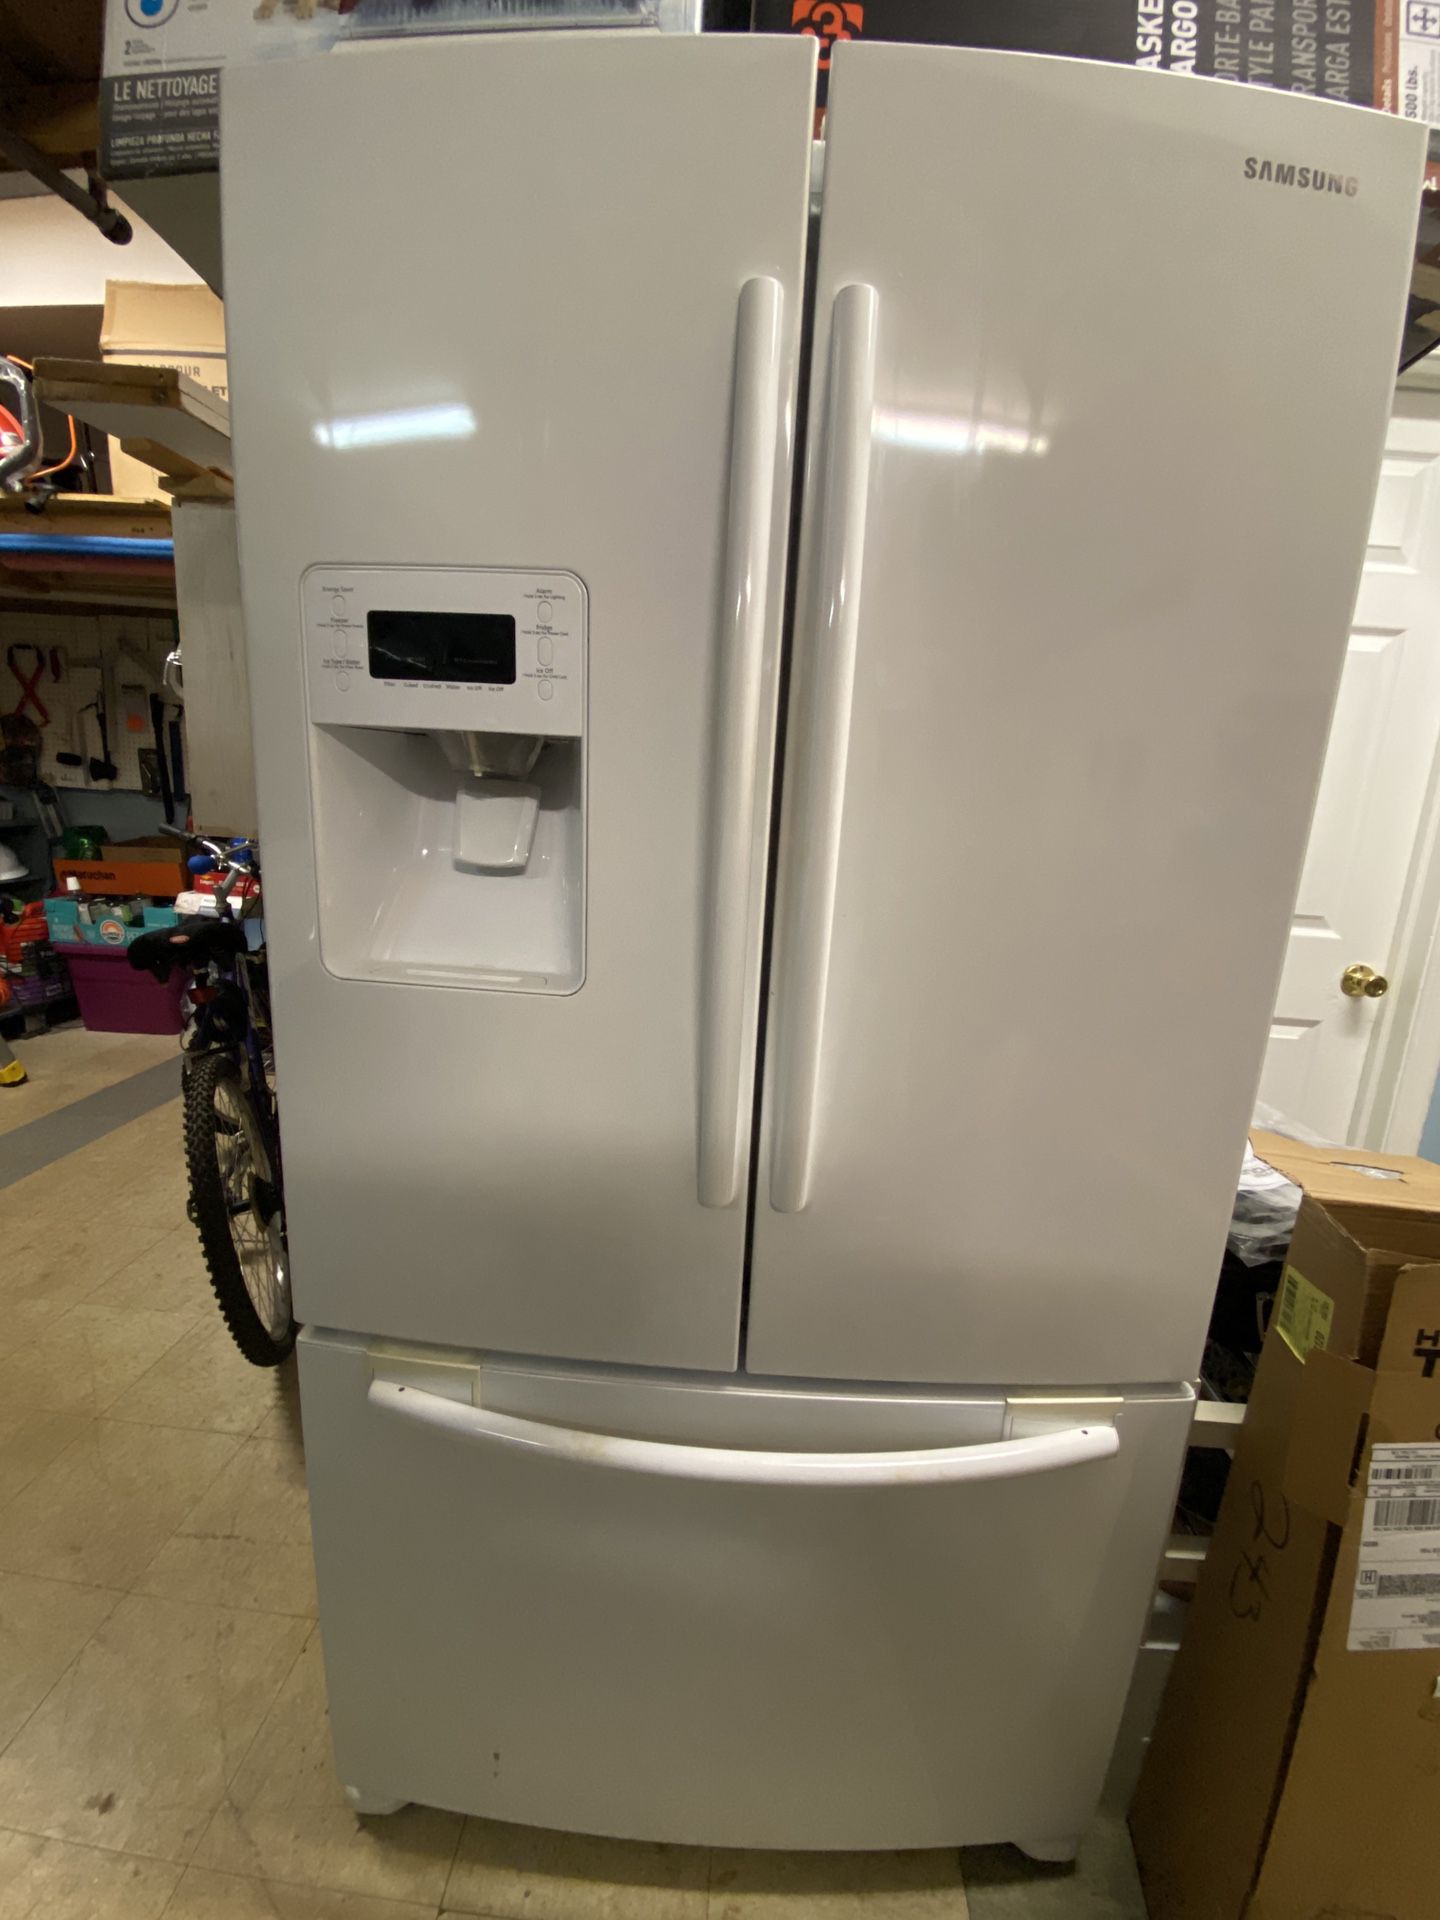 Samsung French Door Refrigerator with Dual Ice Maker